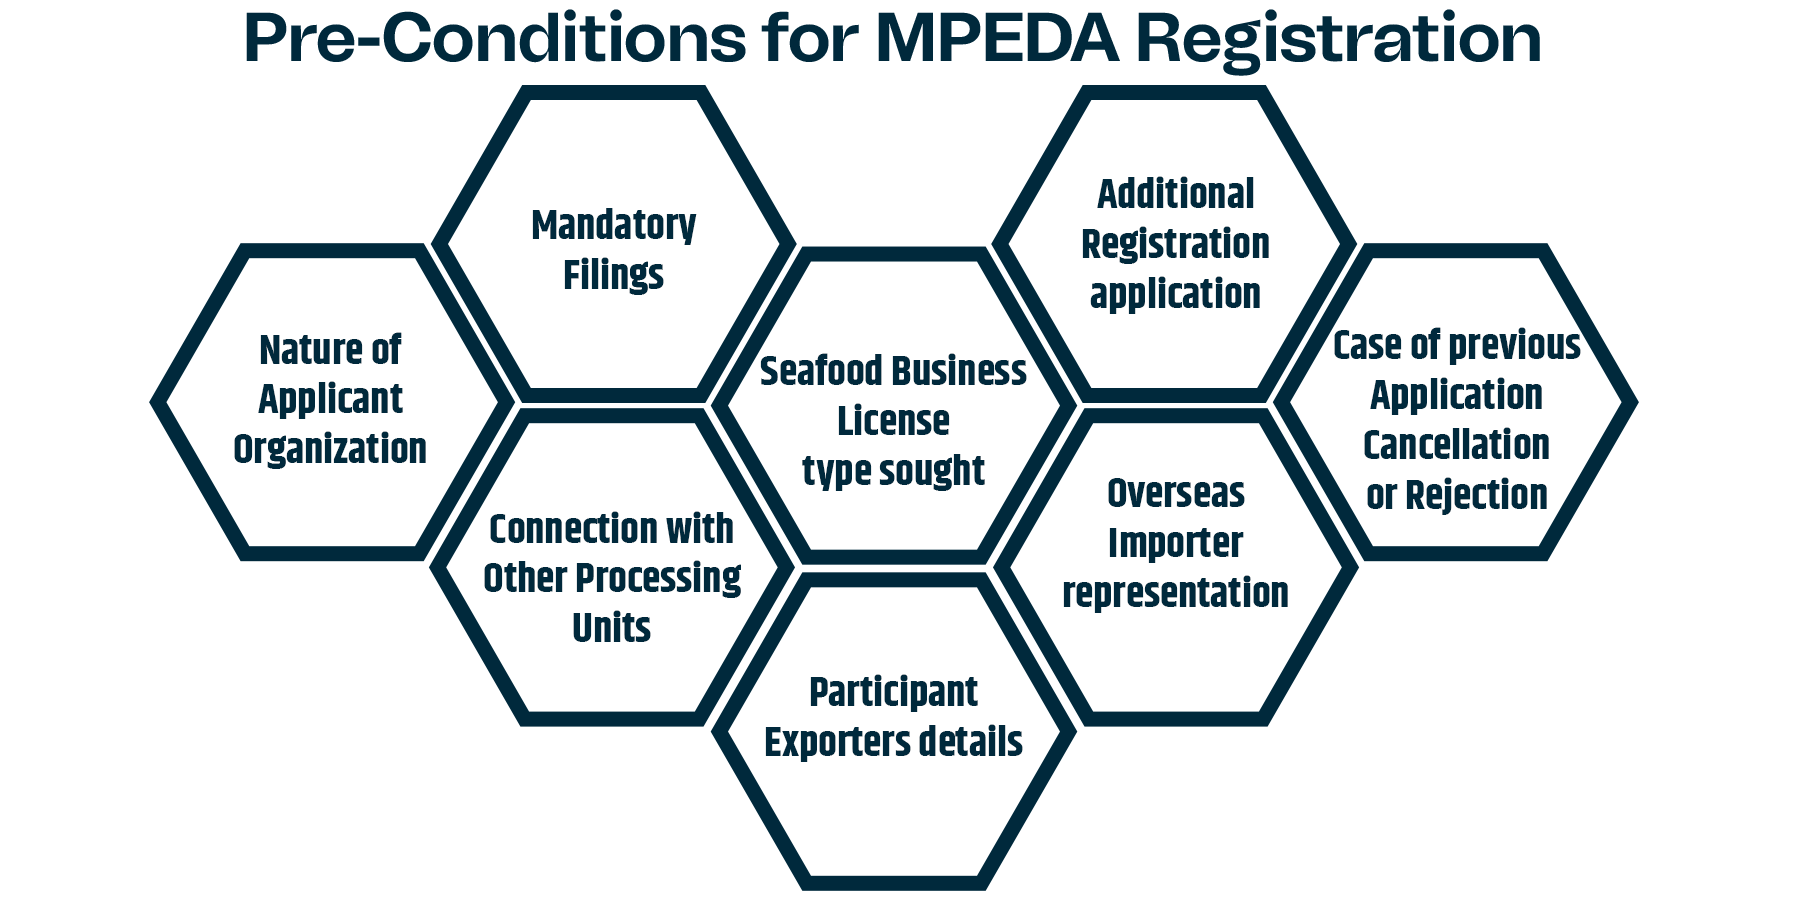 Pre-conditions for mpeda registration in India